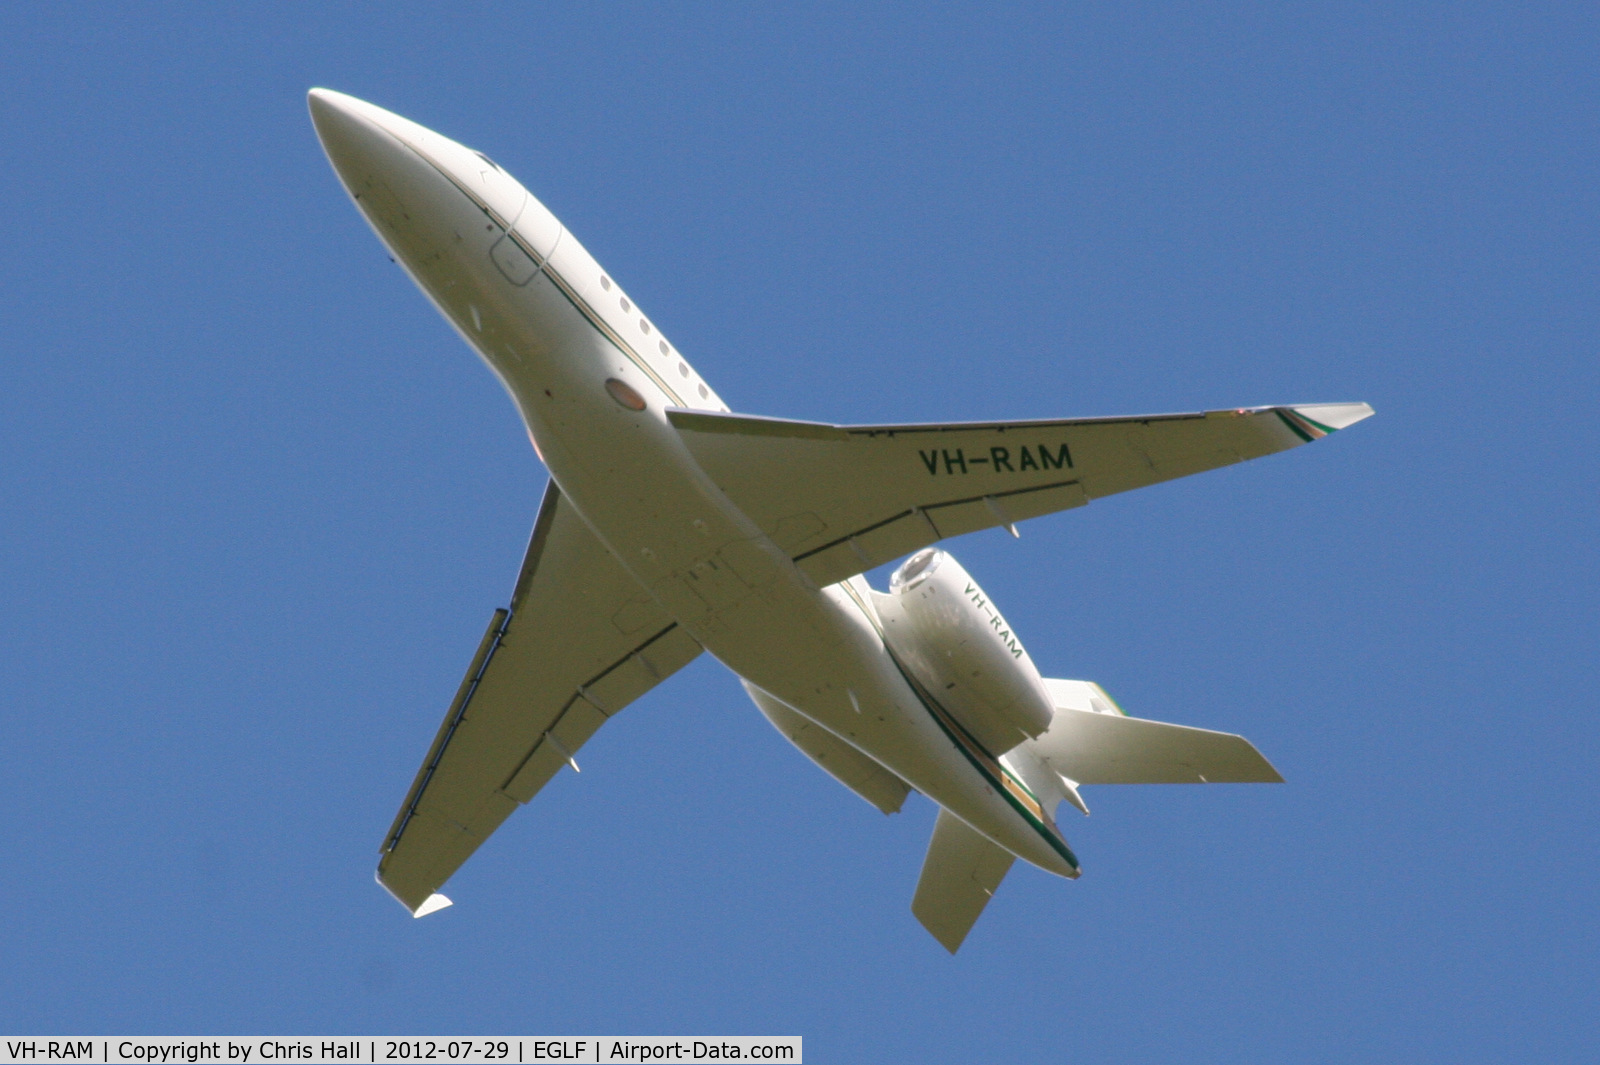 VH-RAM, 2008 Dassault Falcon 2000EX C/N 162, Ramsay Aircharter Pty Limited